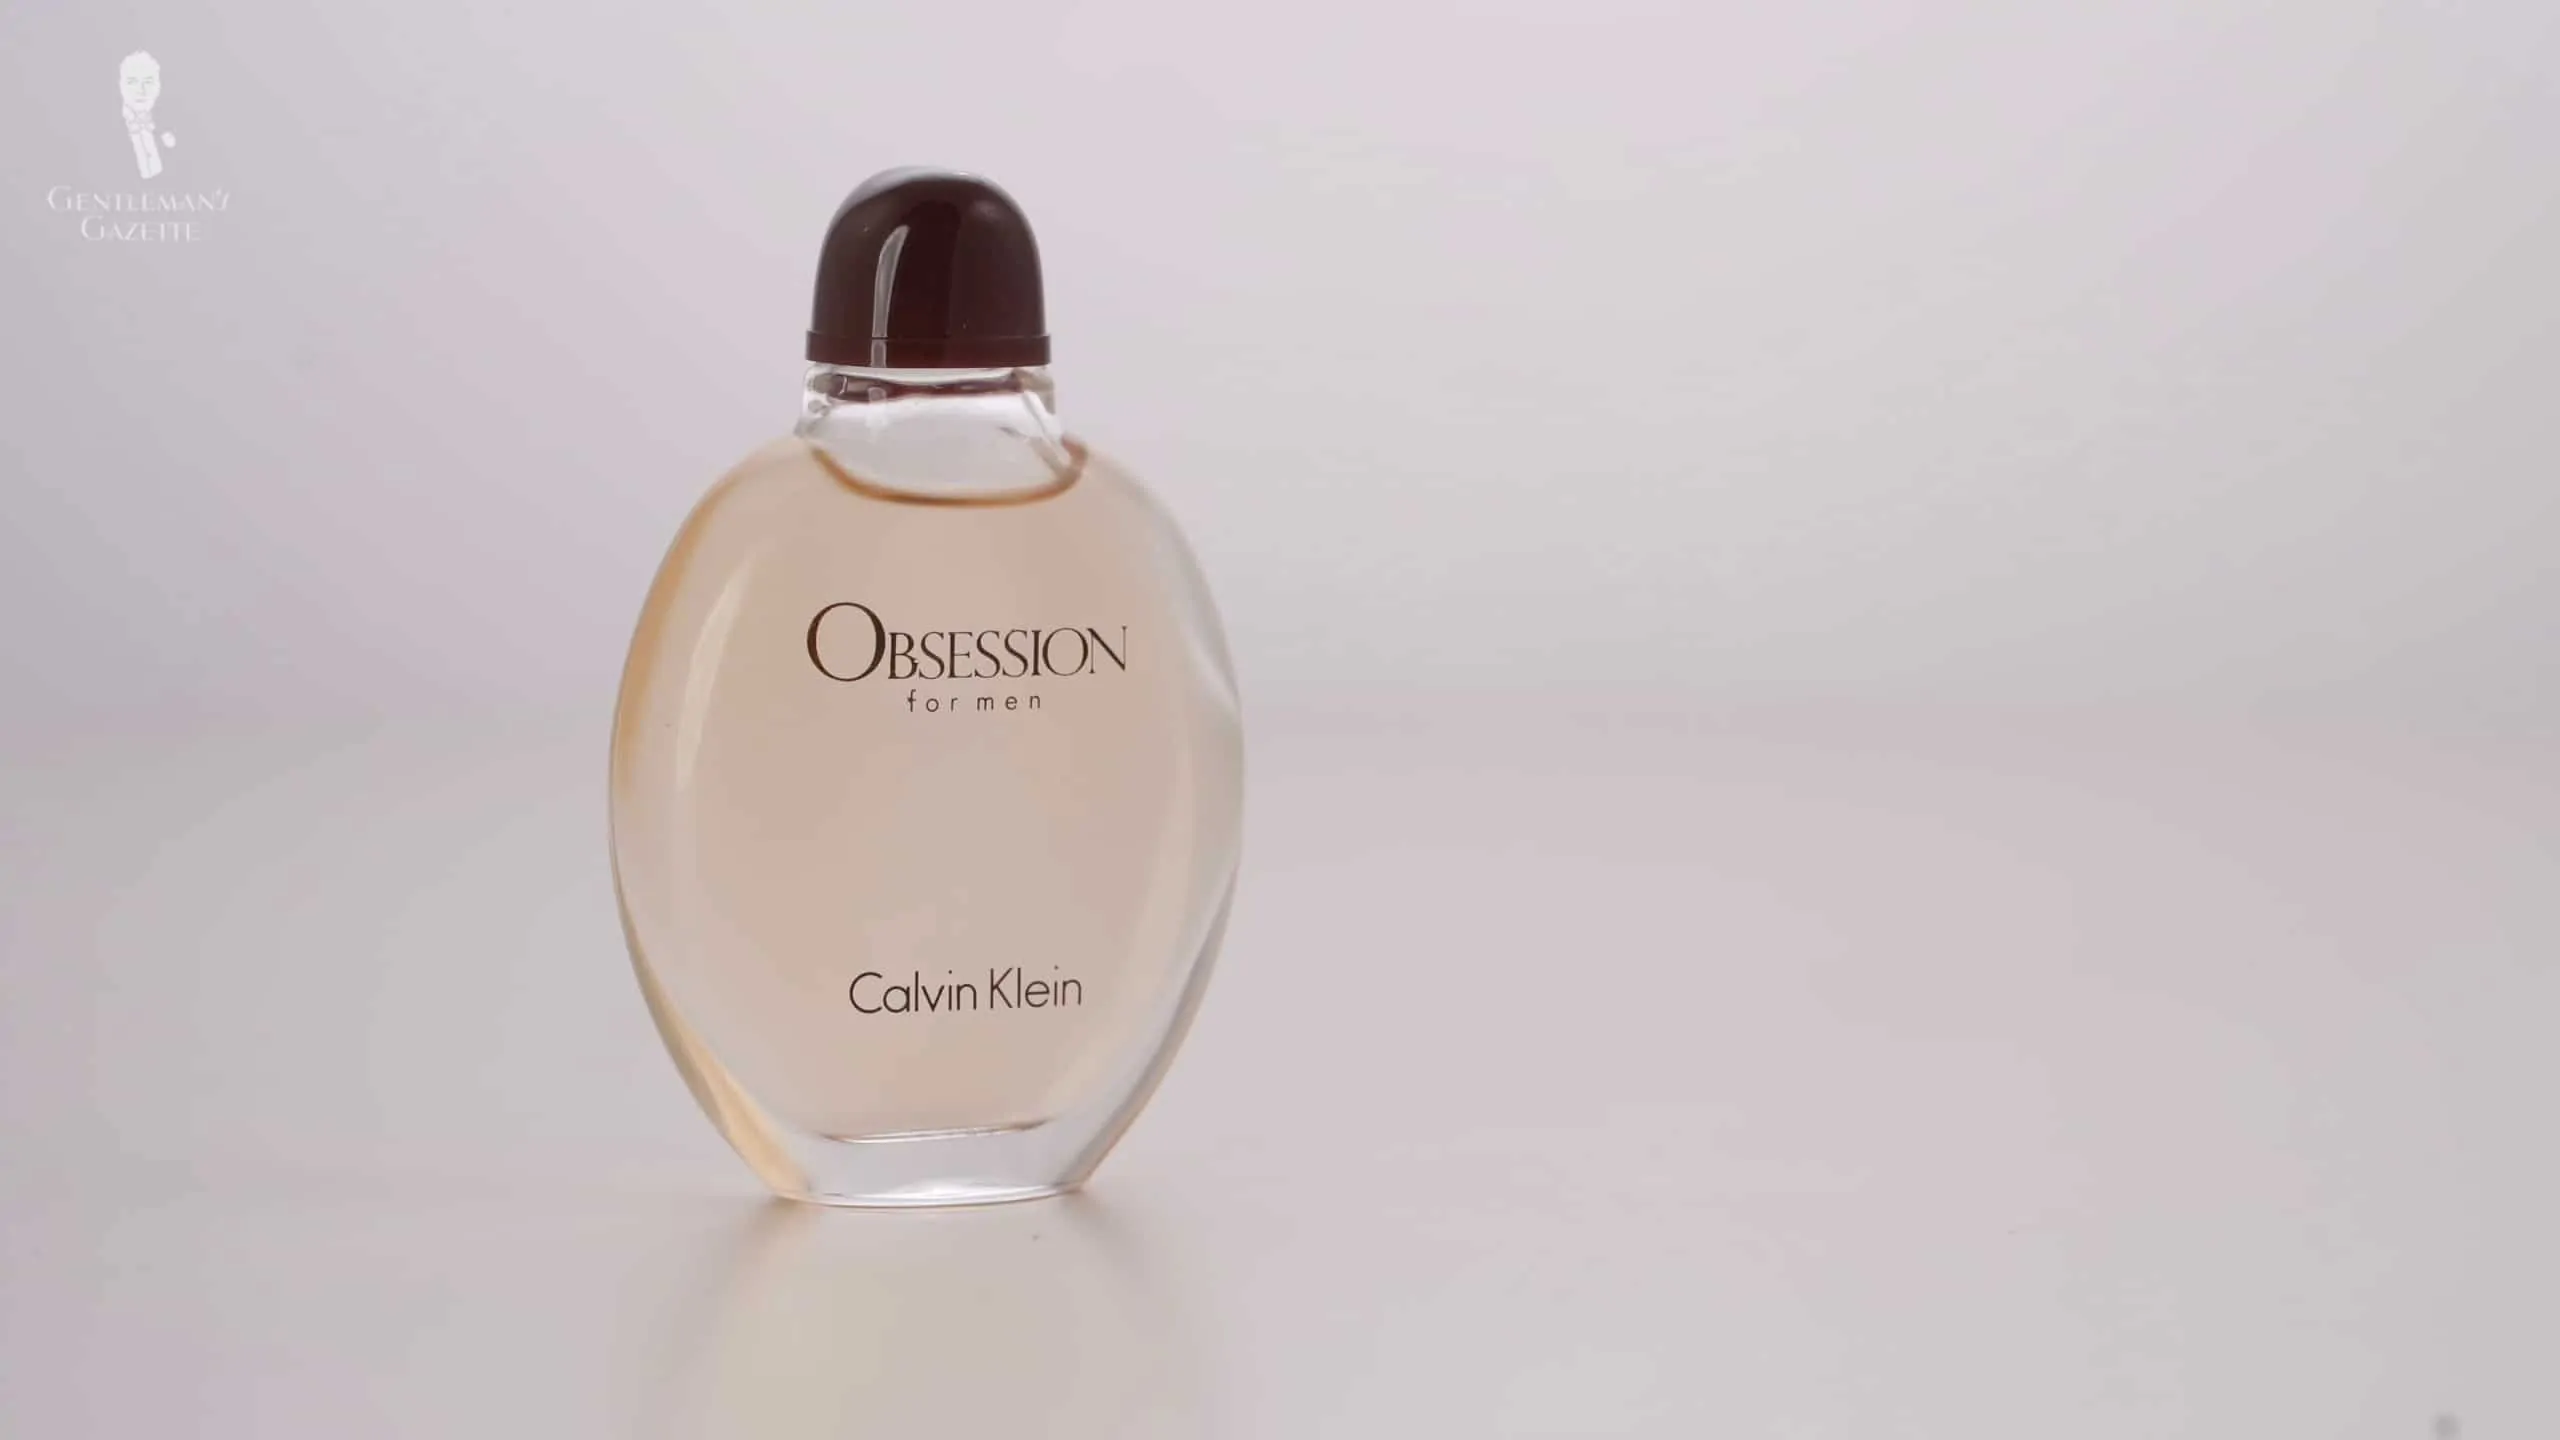 A photo of a bottle of Calvin Klein Obsession 